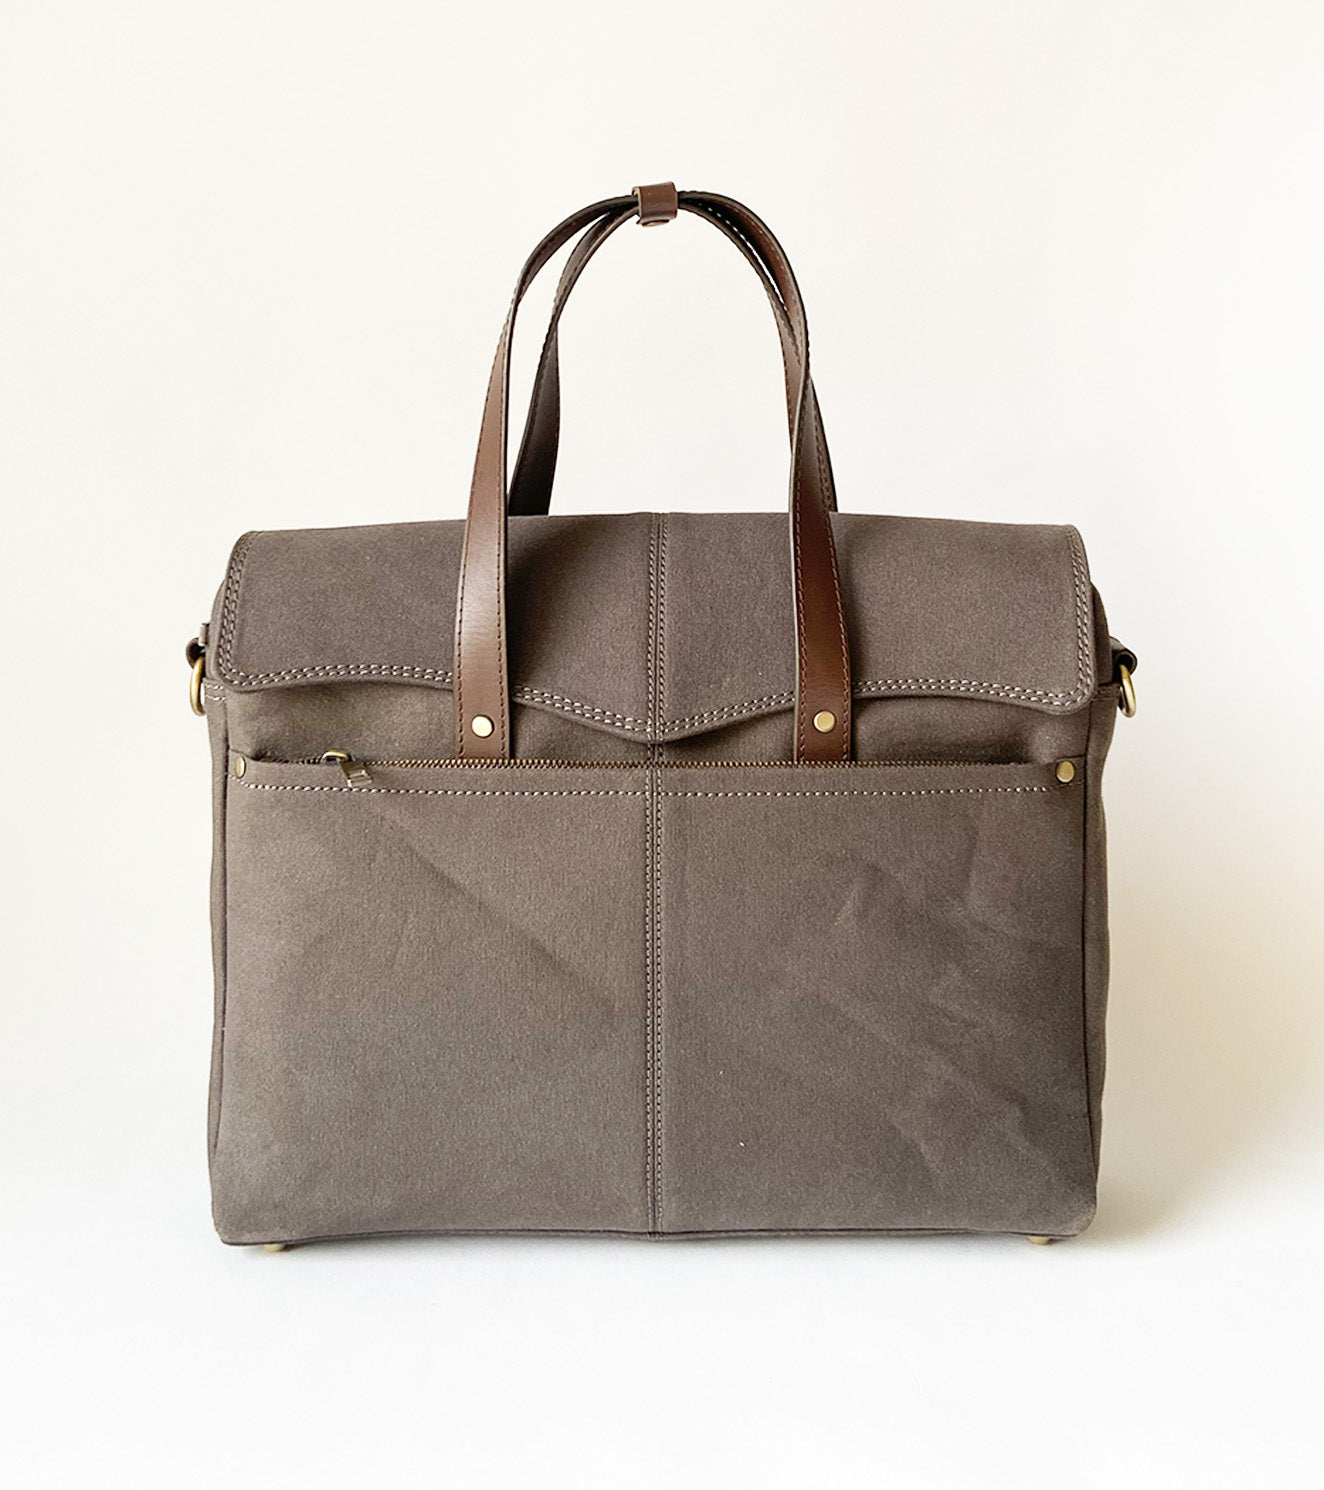 Charcoal briefcase